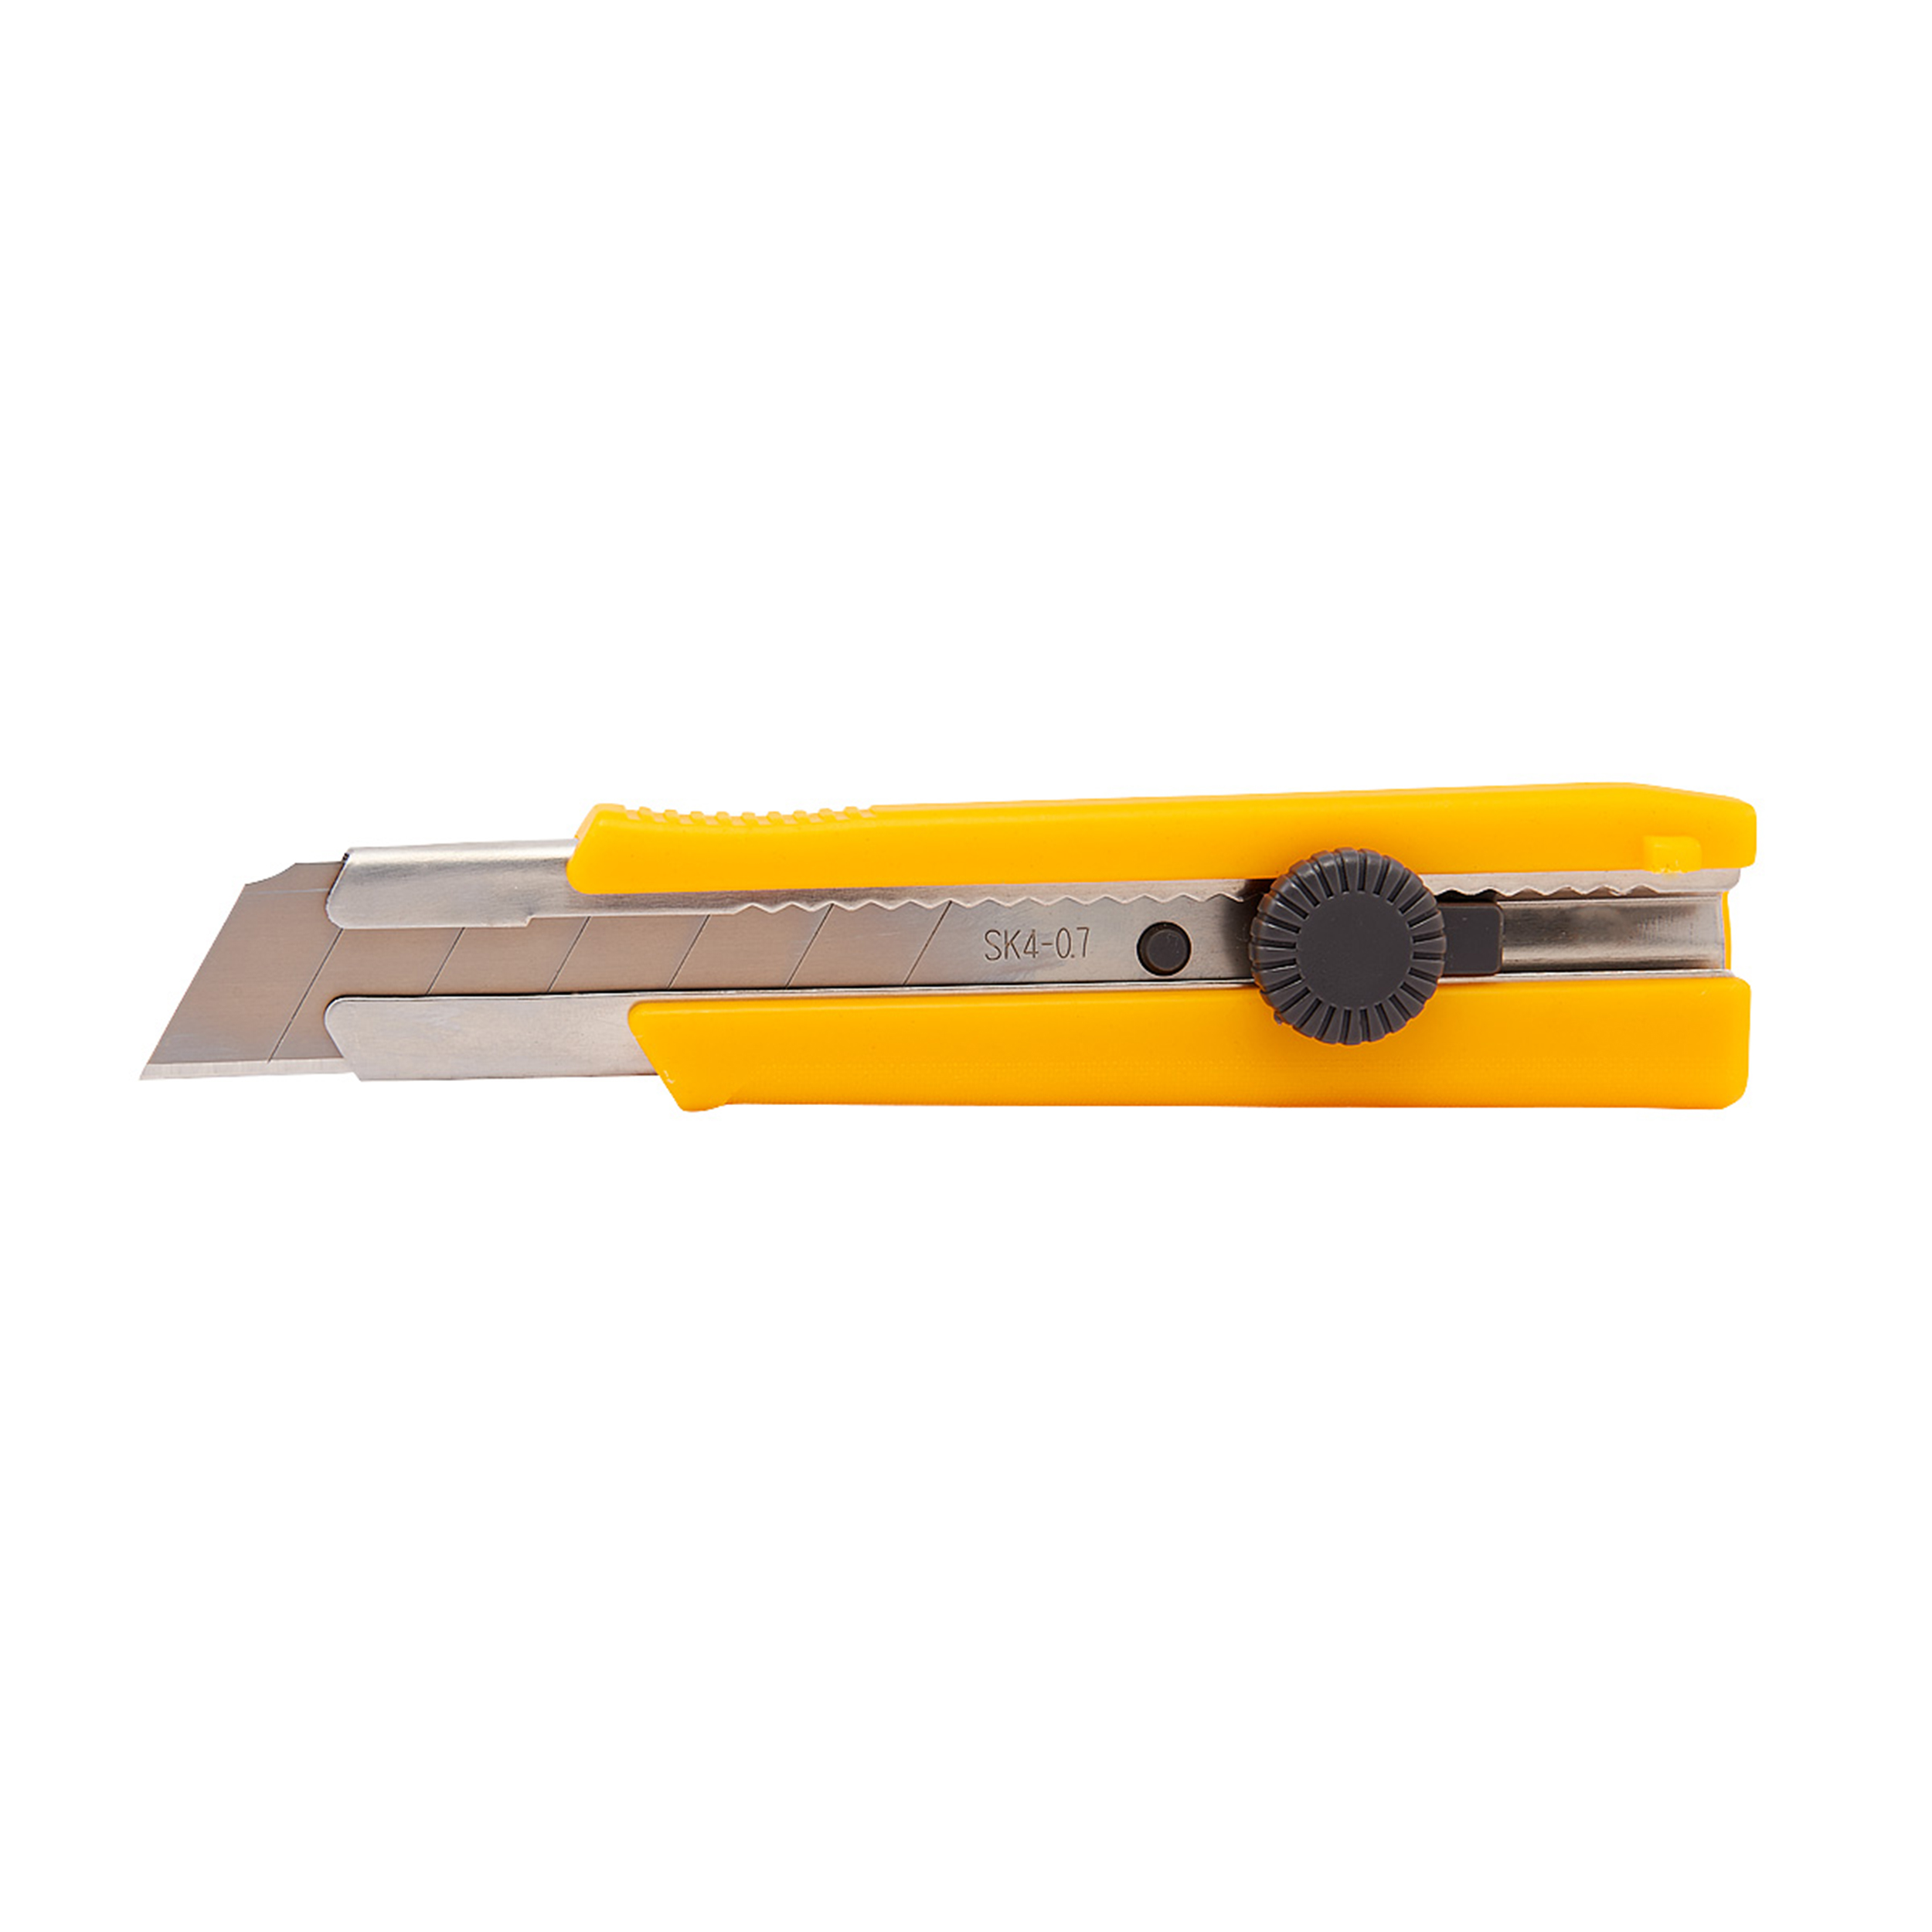 Snap Knife With Dial-lock, 1" X .7mm Thick, Heavy Duty